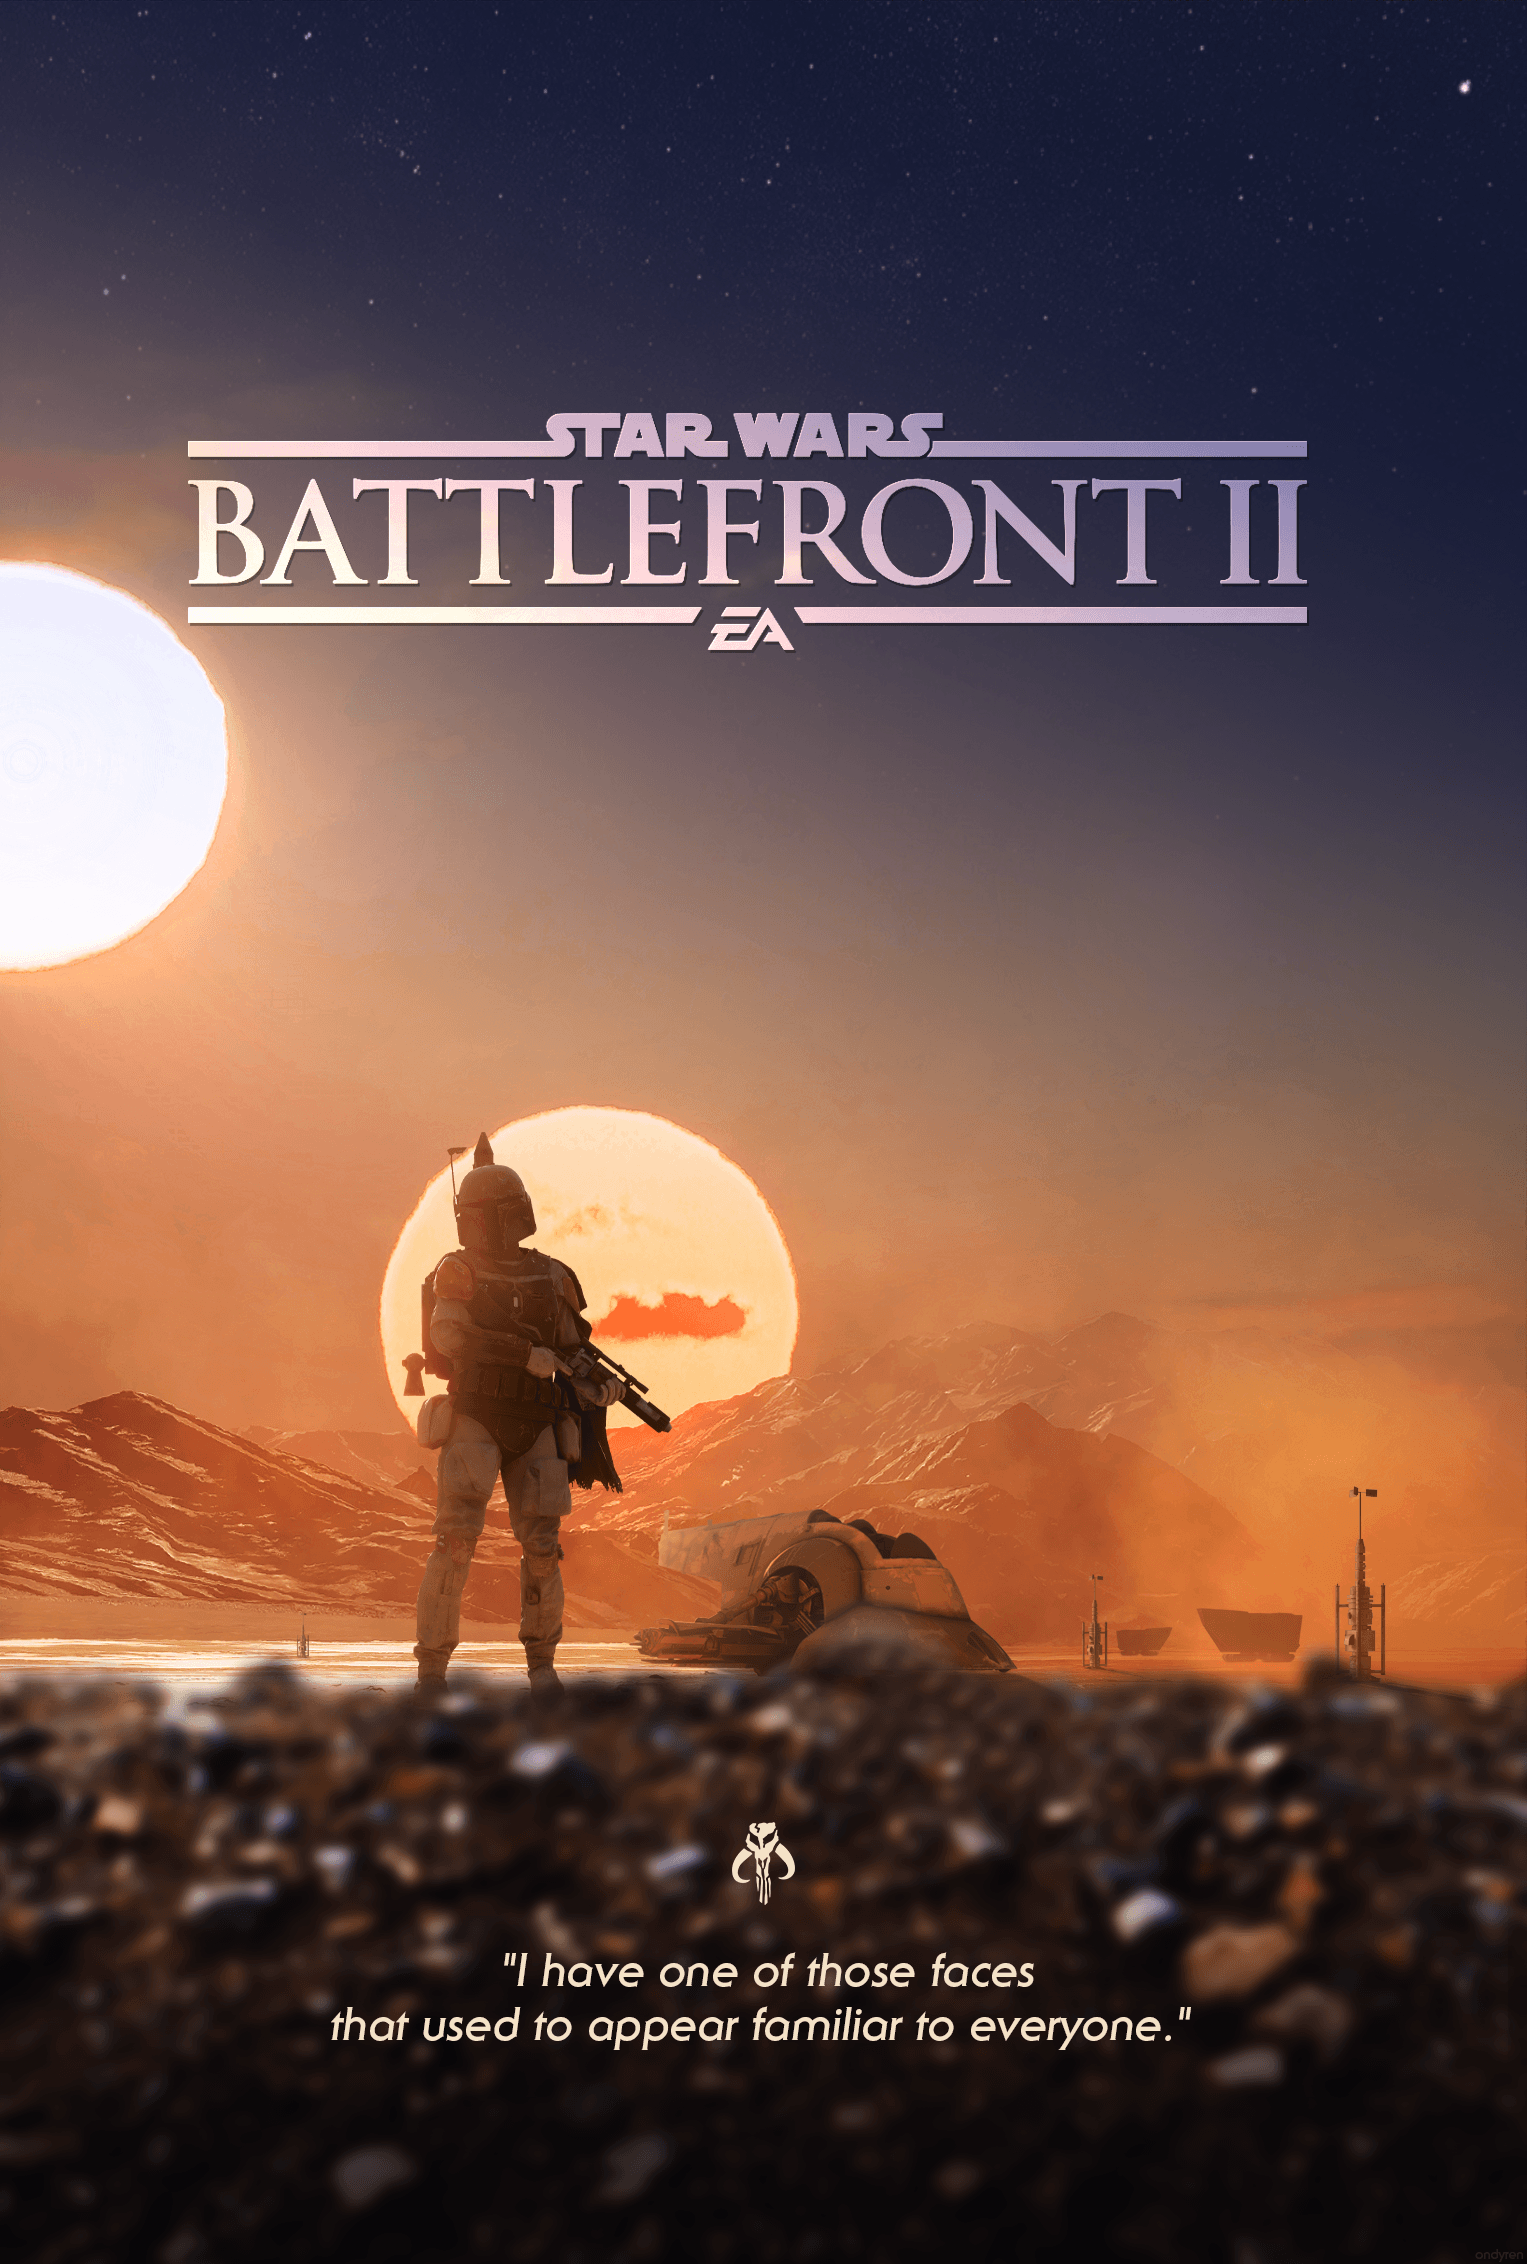 The Mandalorian poster recreated in Battlefront II